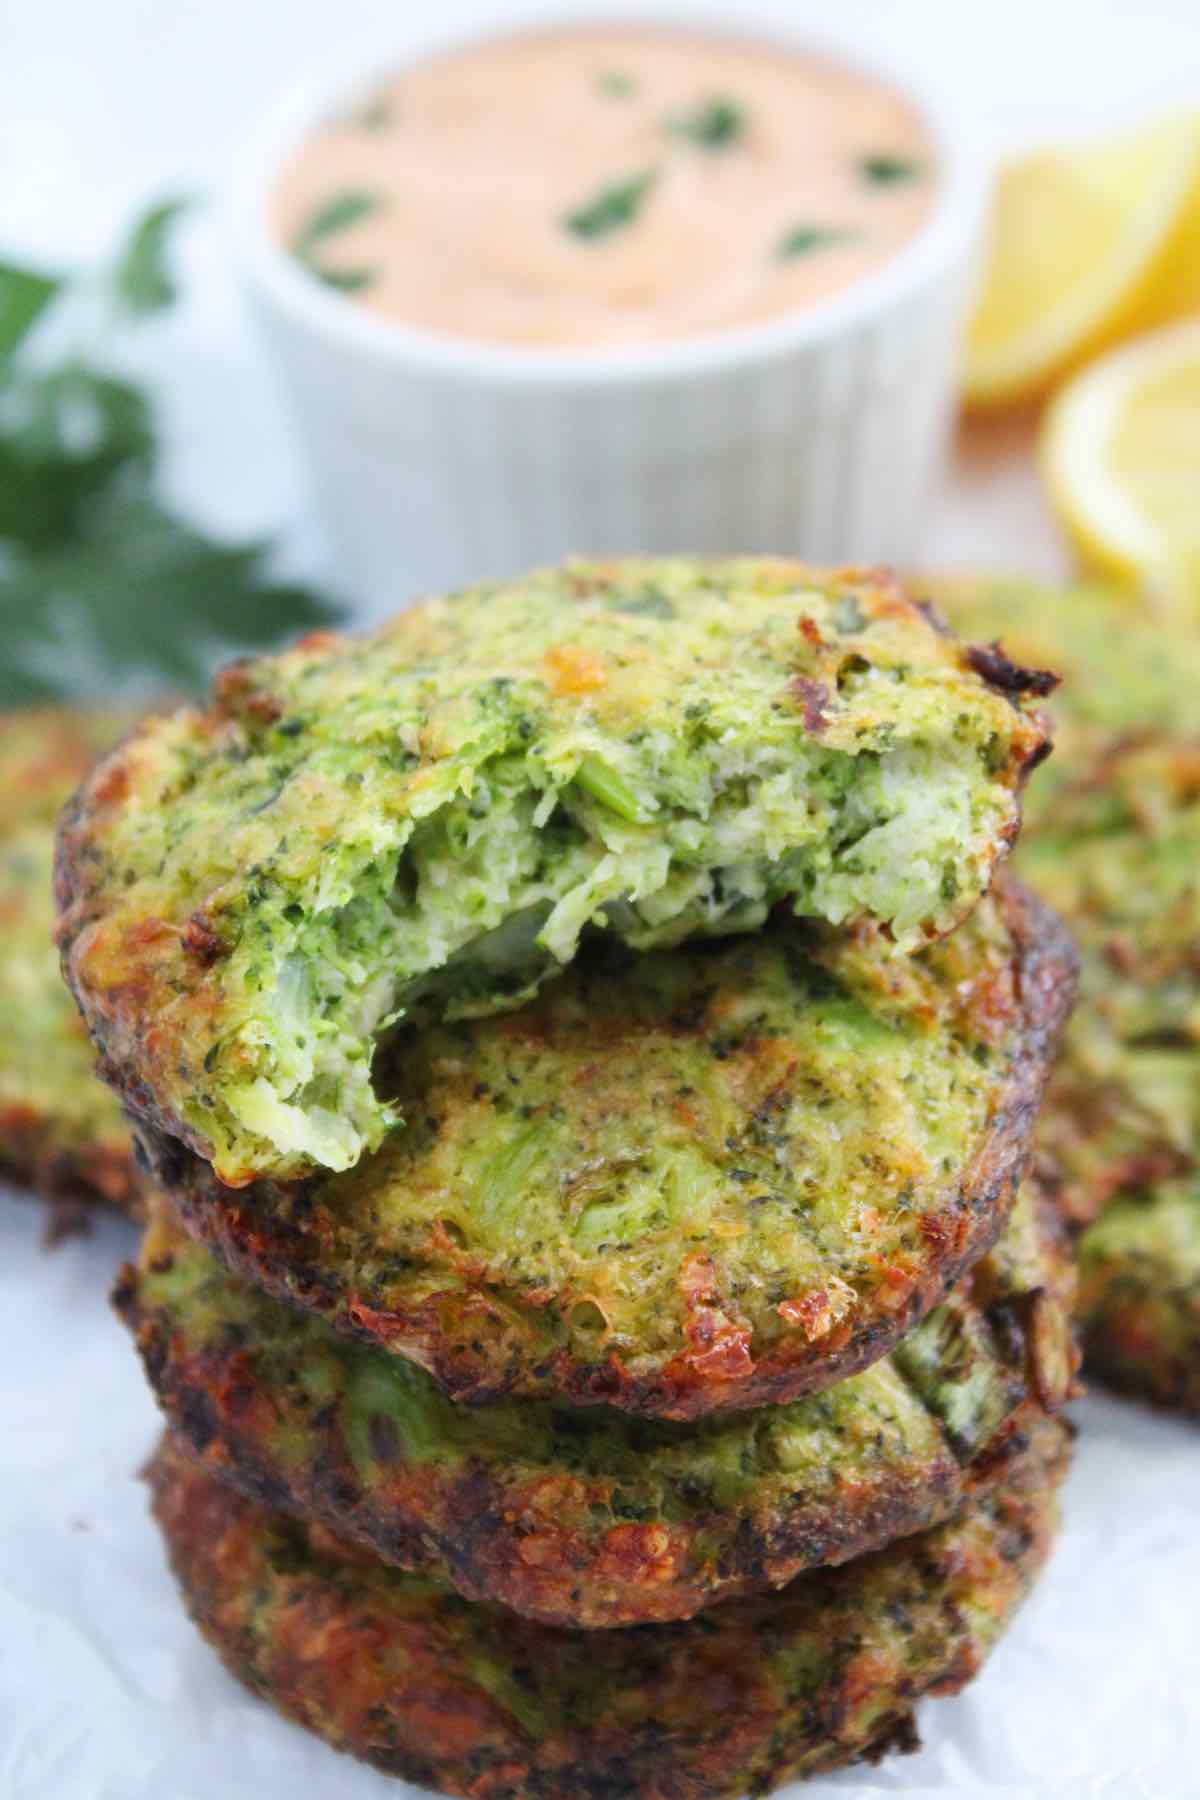 These air fryer broccoli fritters are made with simple everyday ingredients.